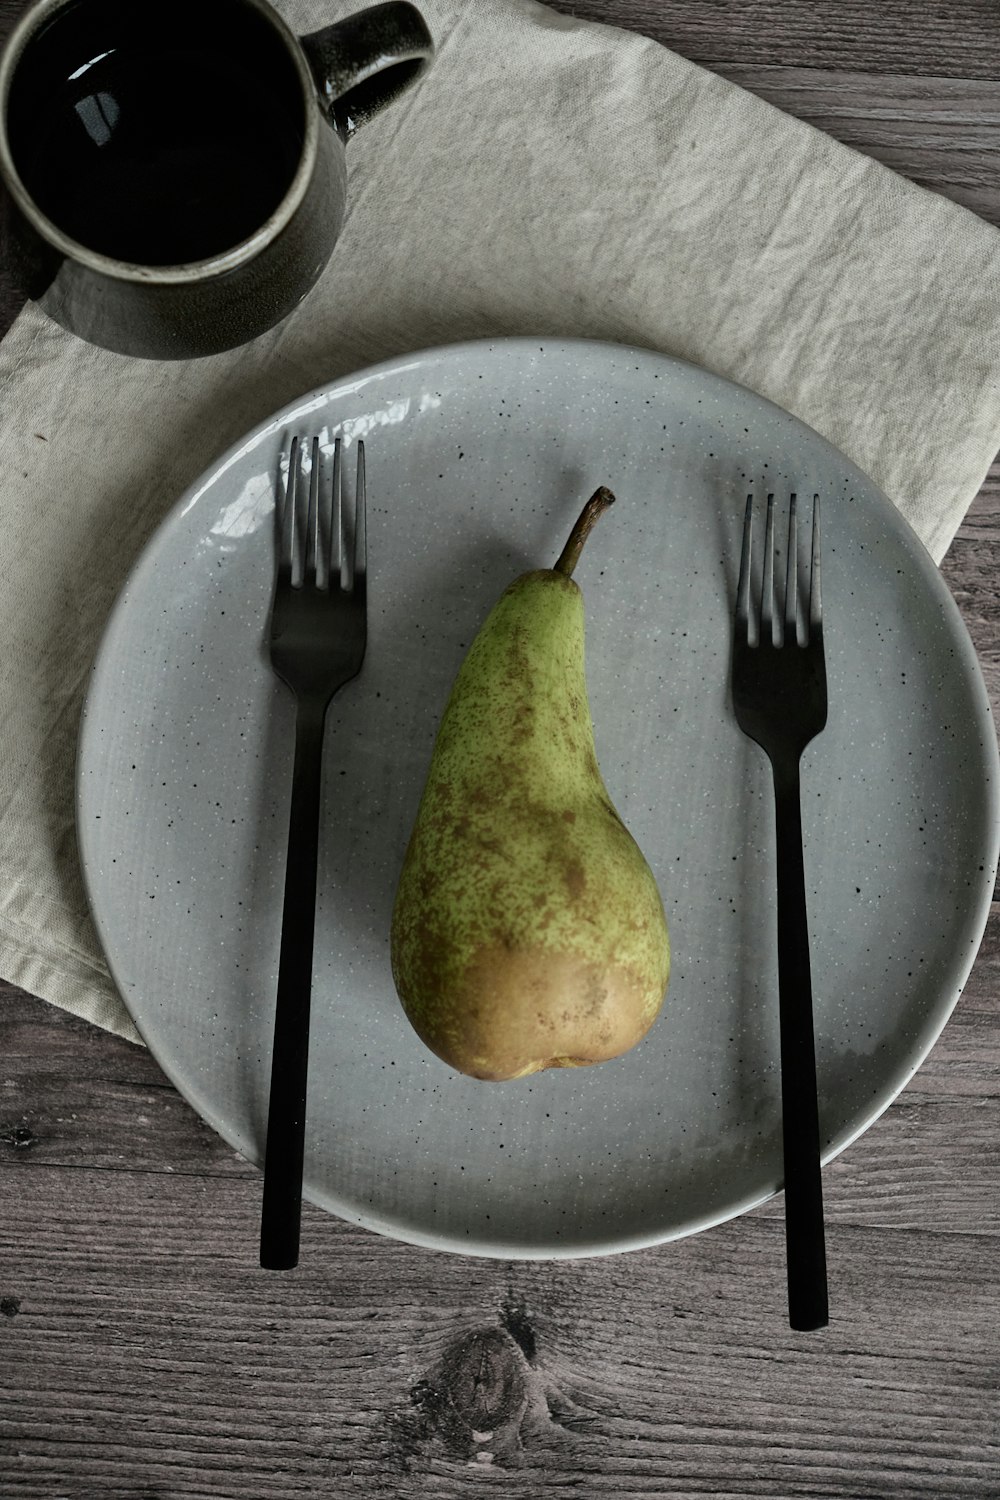 a pear and fork on a plate with a cup of coffee